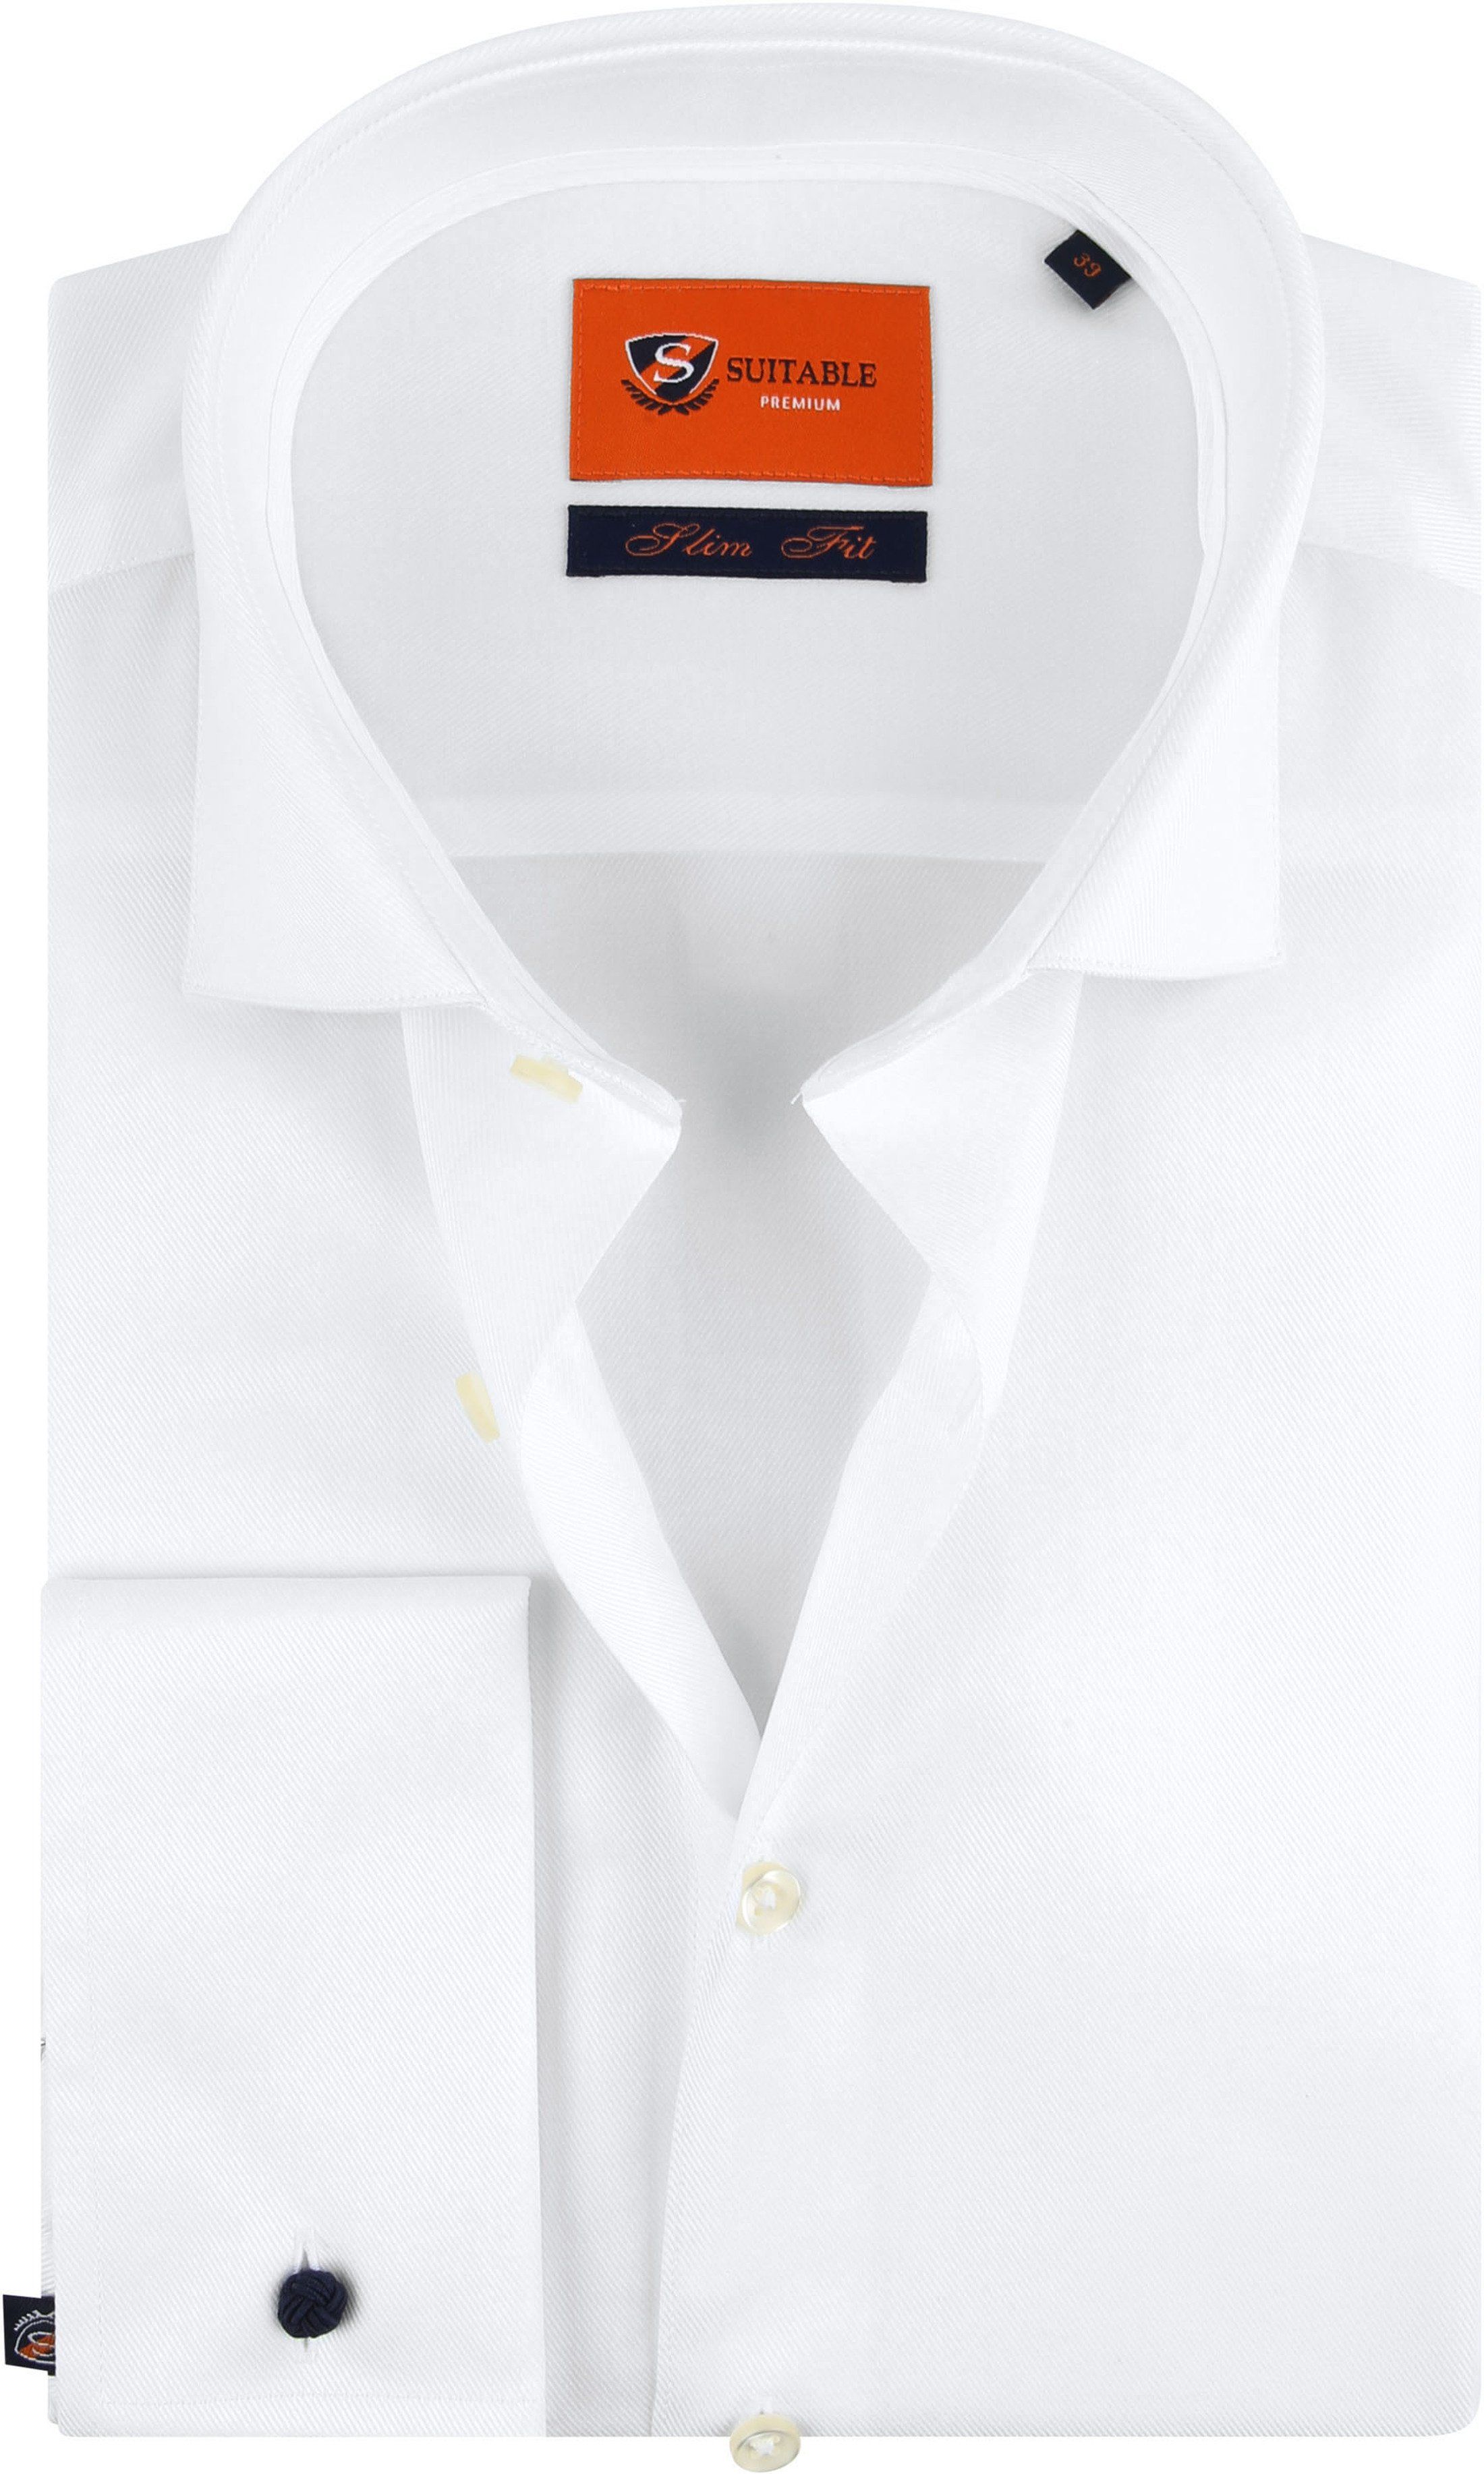 Suitable Shirt Twill Double Cuff White size 15 1/2